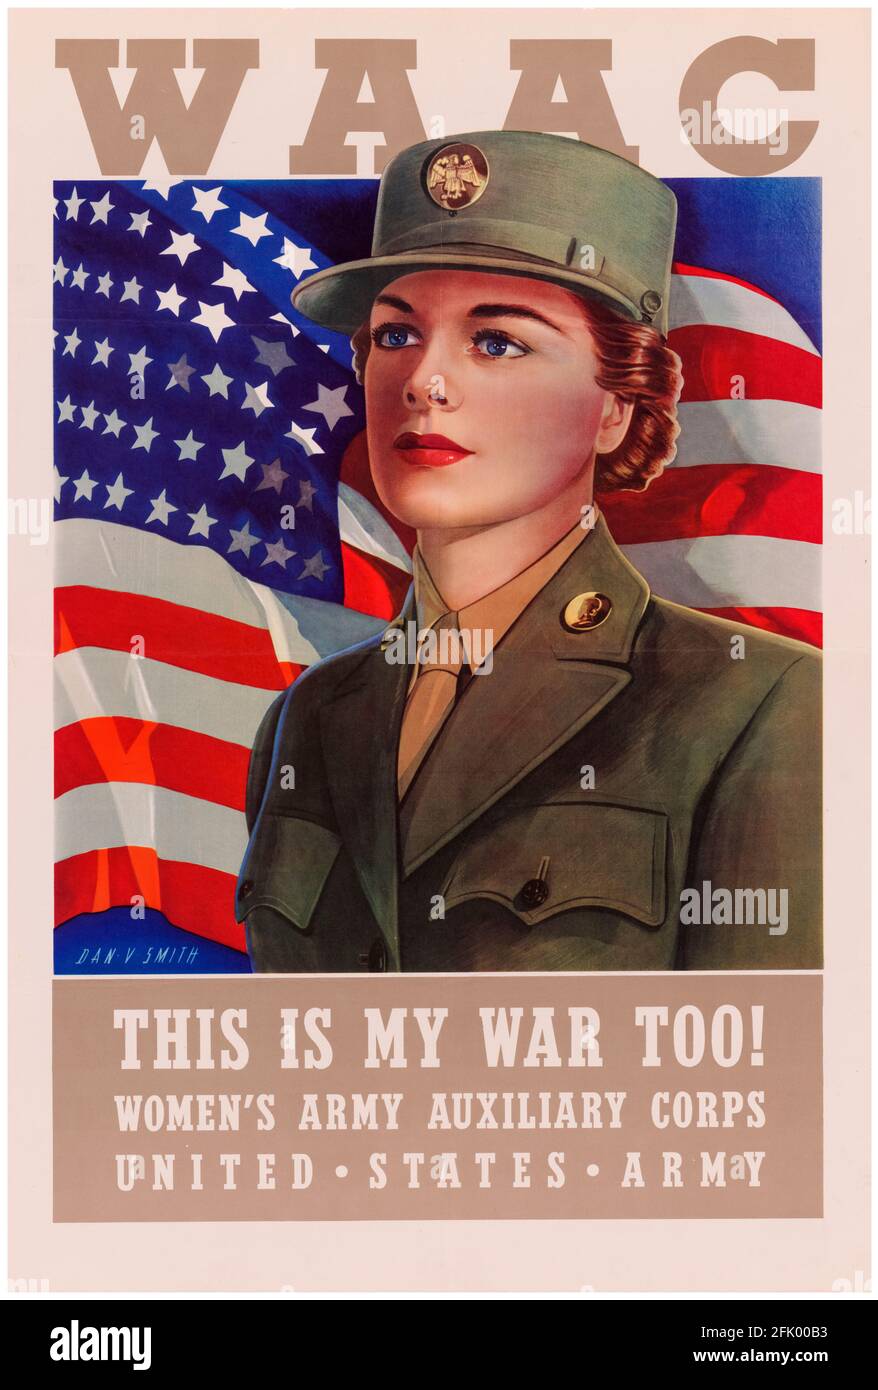 American, WW2 female war work poster, WAAC, Women's Army Auxiliary Corps, This is My War Too!, 1941-1945 Stock Photo